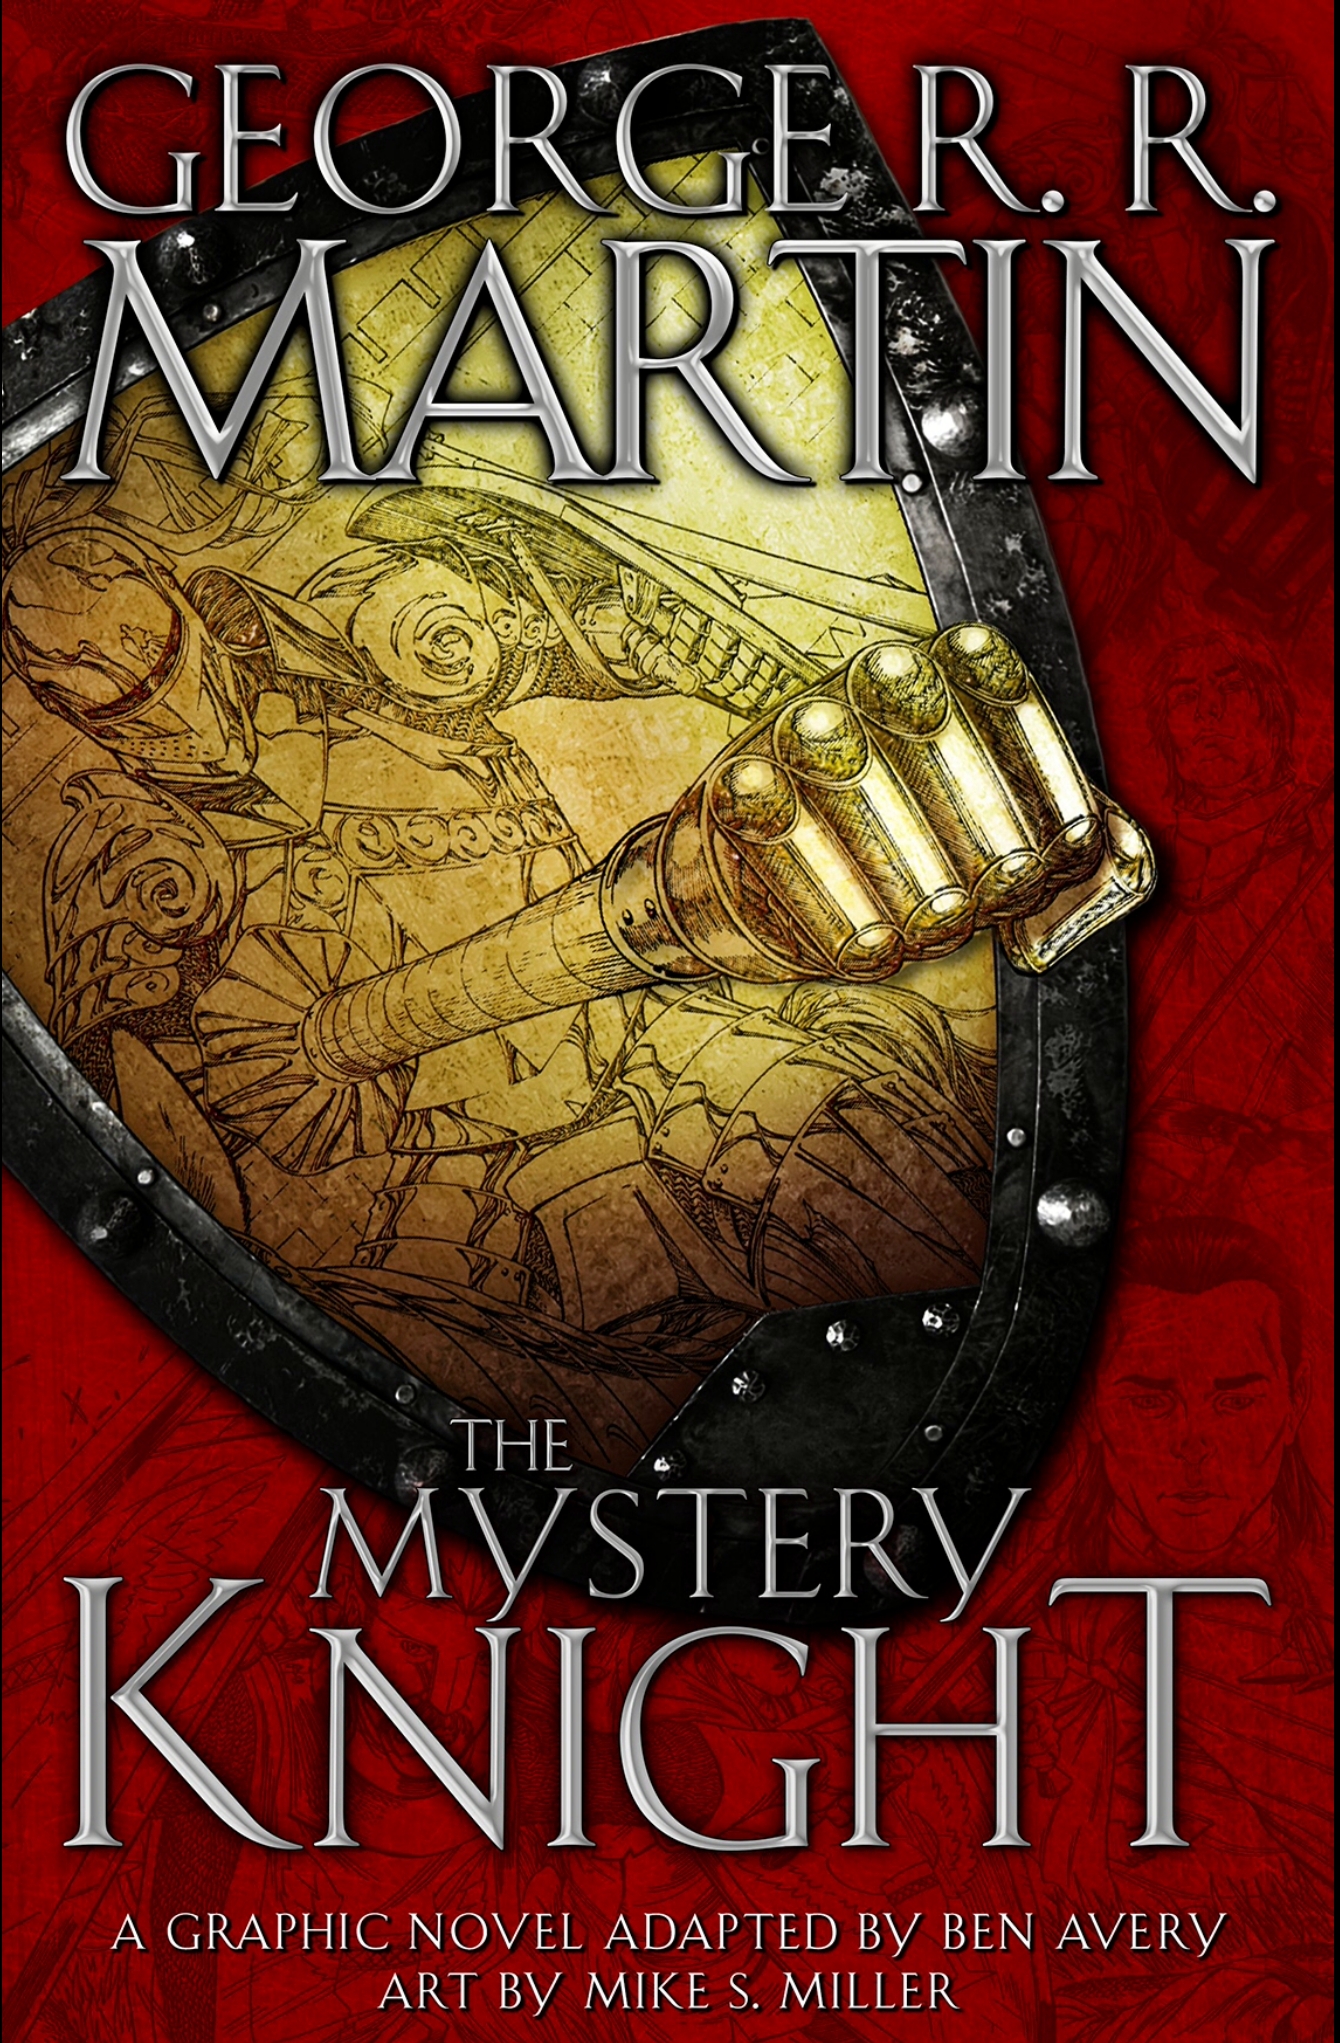 Read online Mystery Knight comic -  Issue # TPB - 1